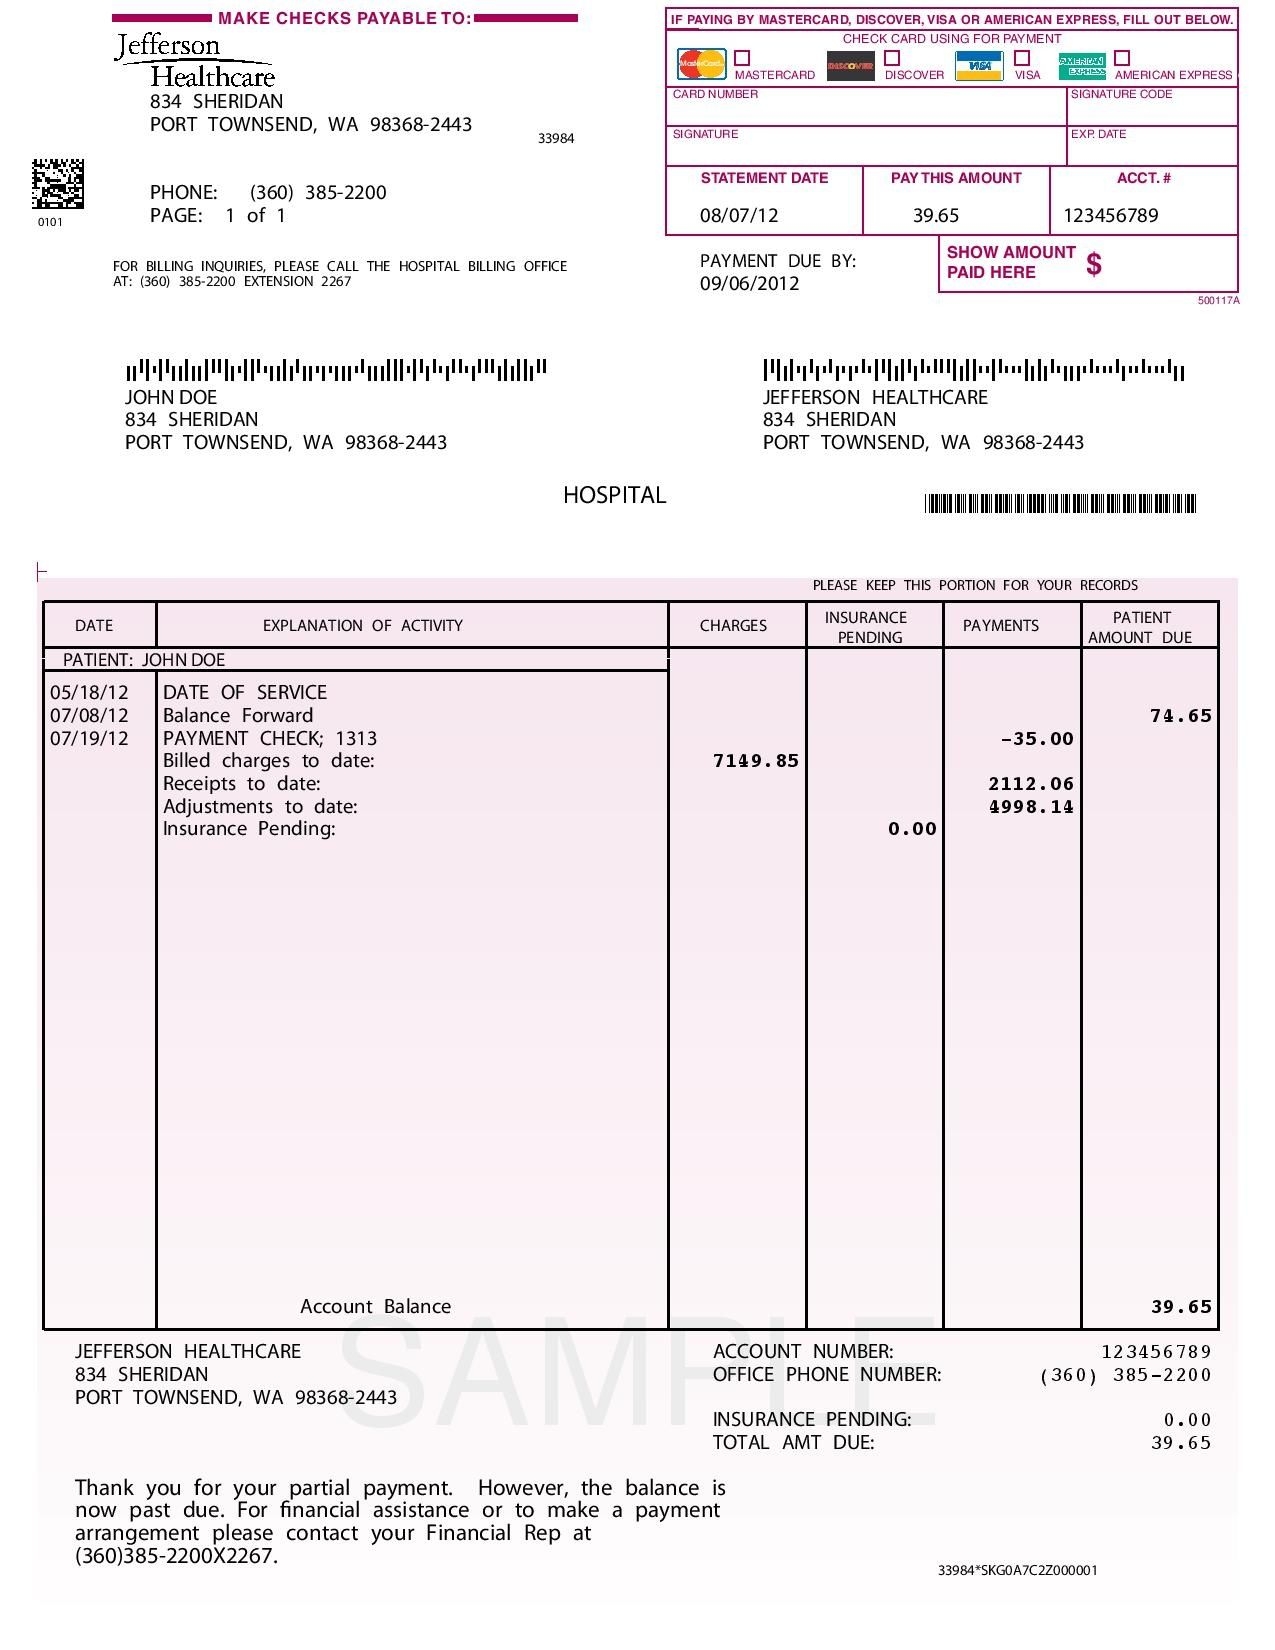 10 best images of sample of invoice for payment sample invoice and payment terms template